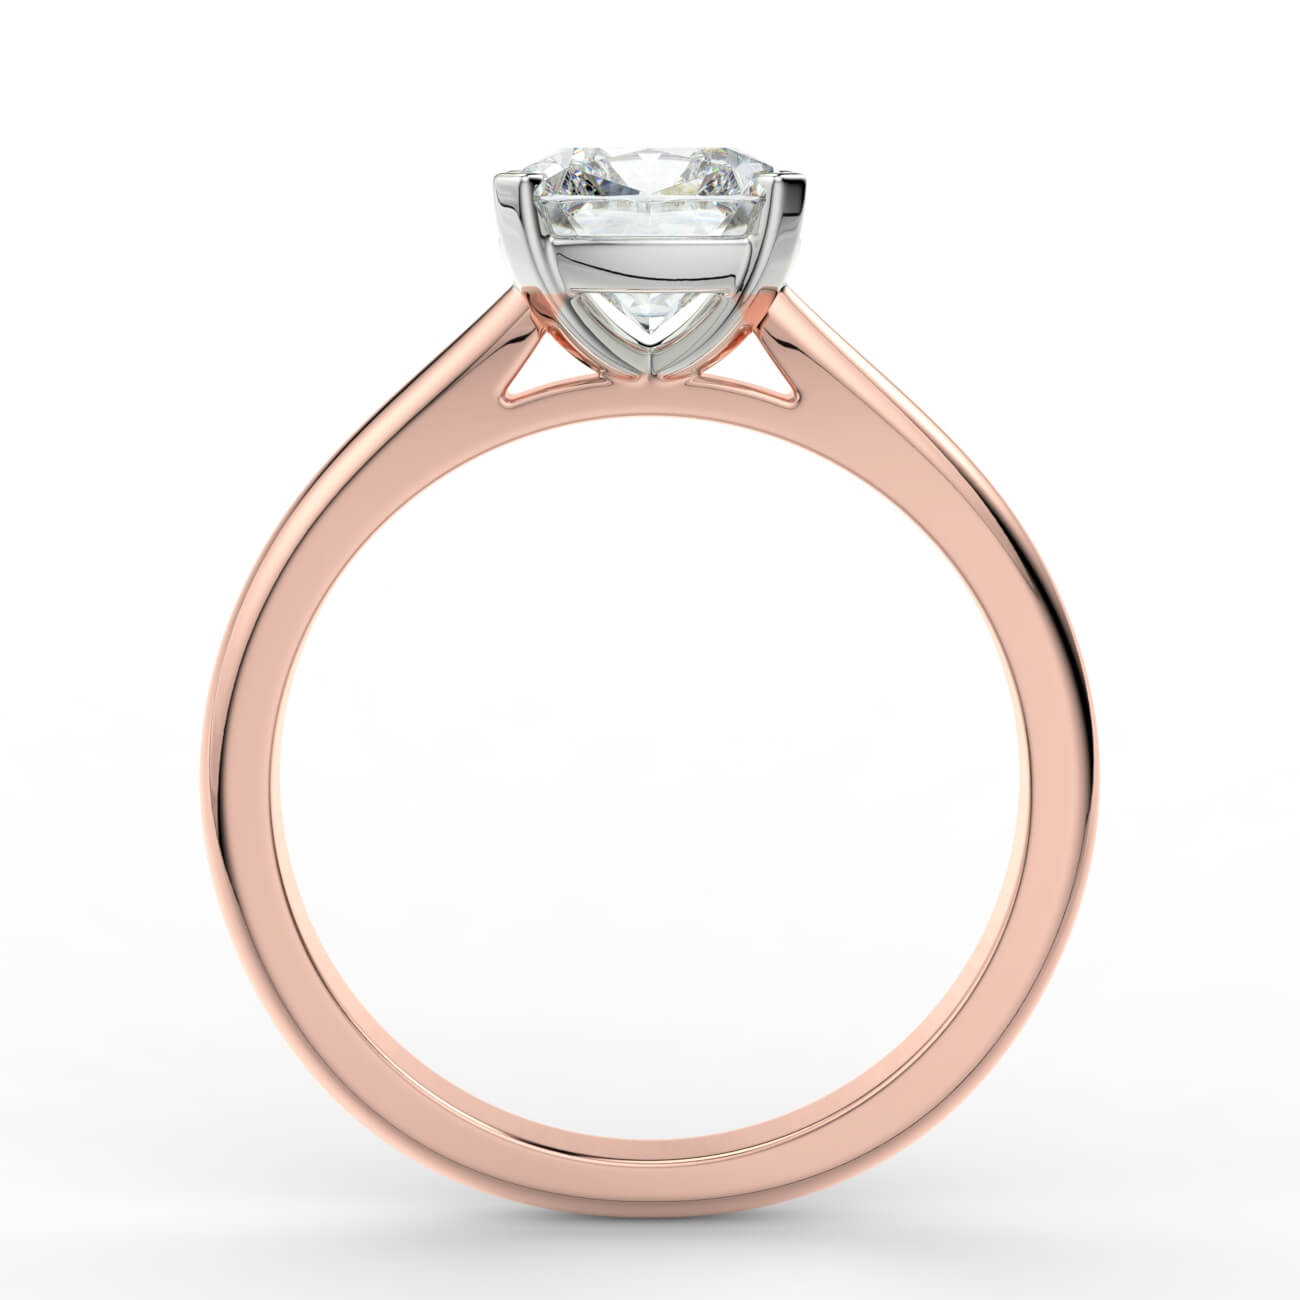 Cushion cut diamond cathedral engagement ring in rose and white gold – Australian Diamond Network